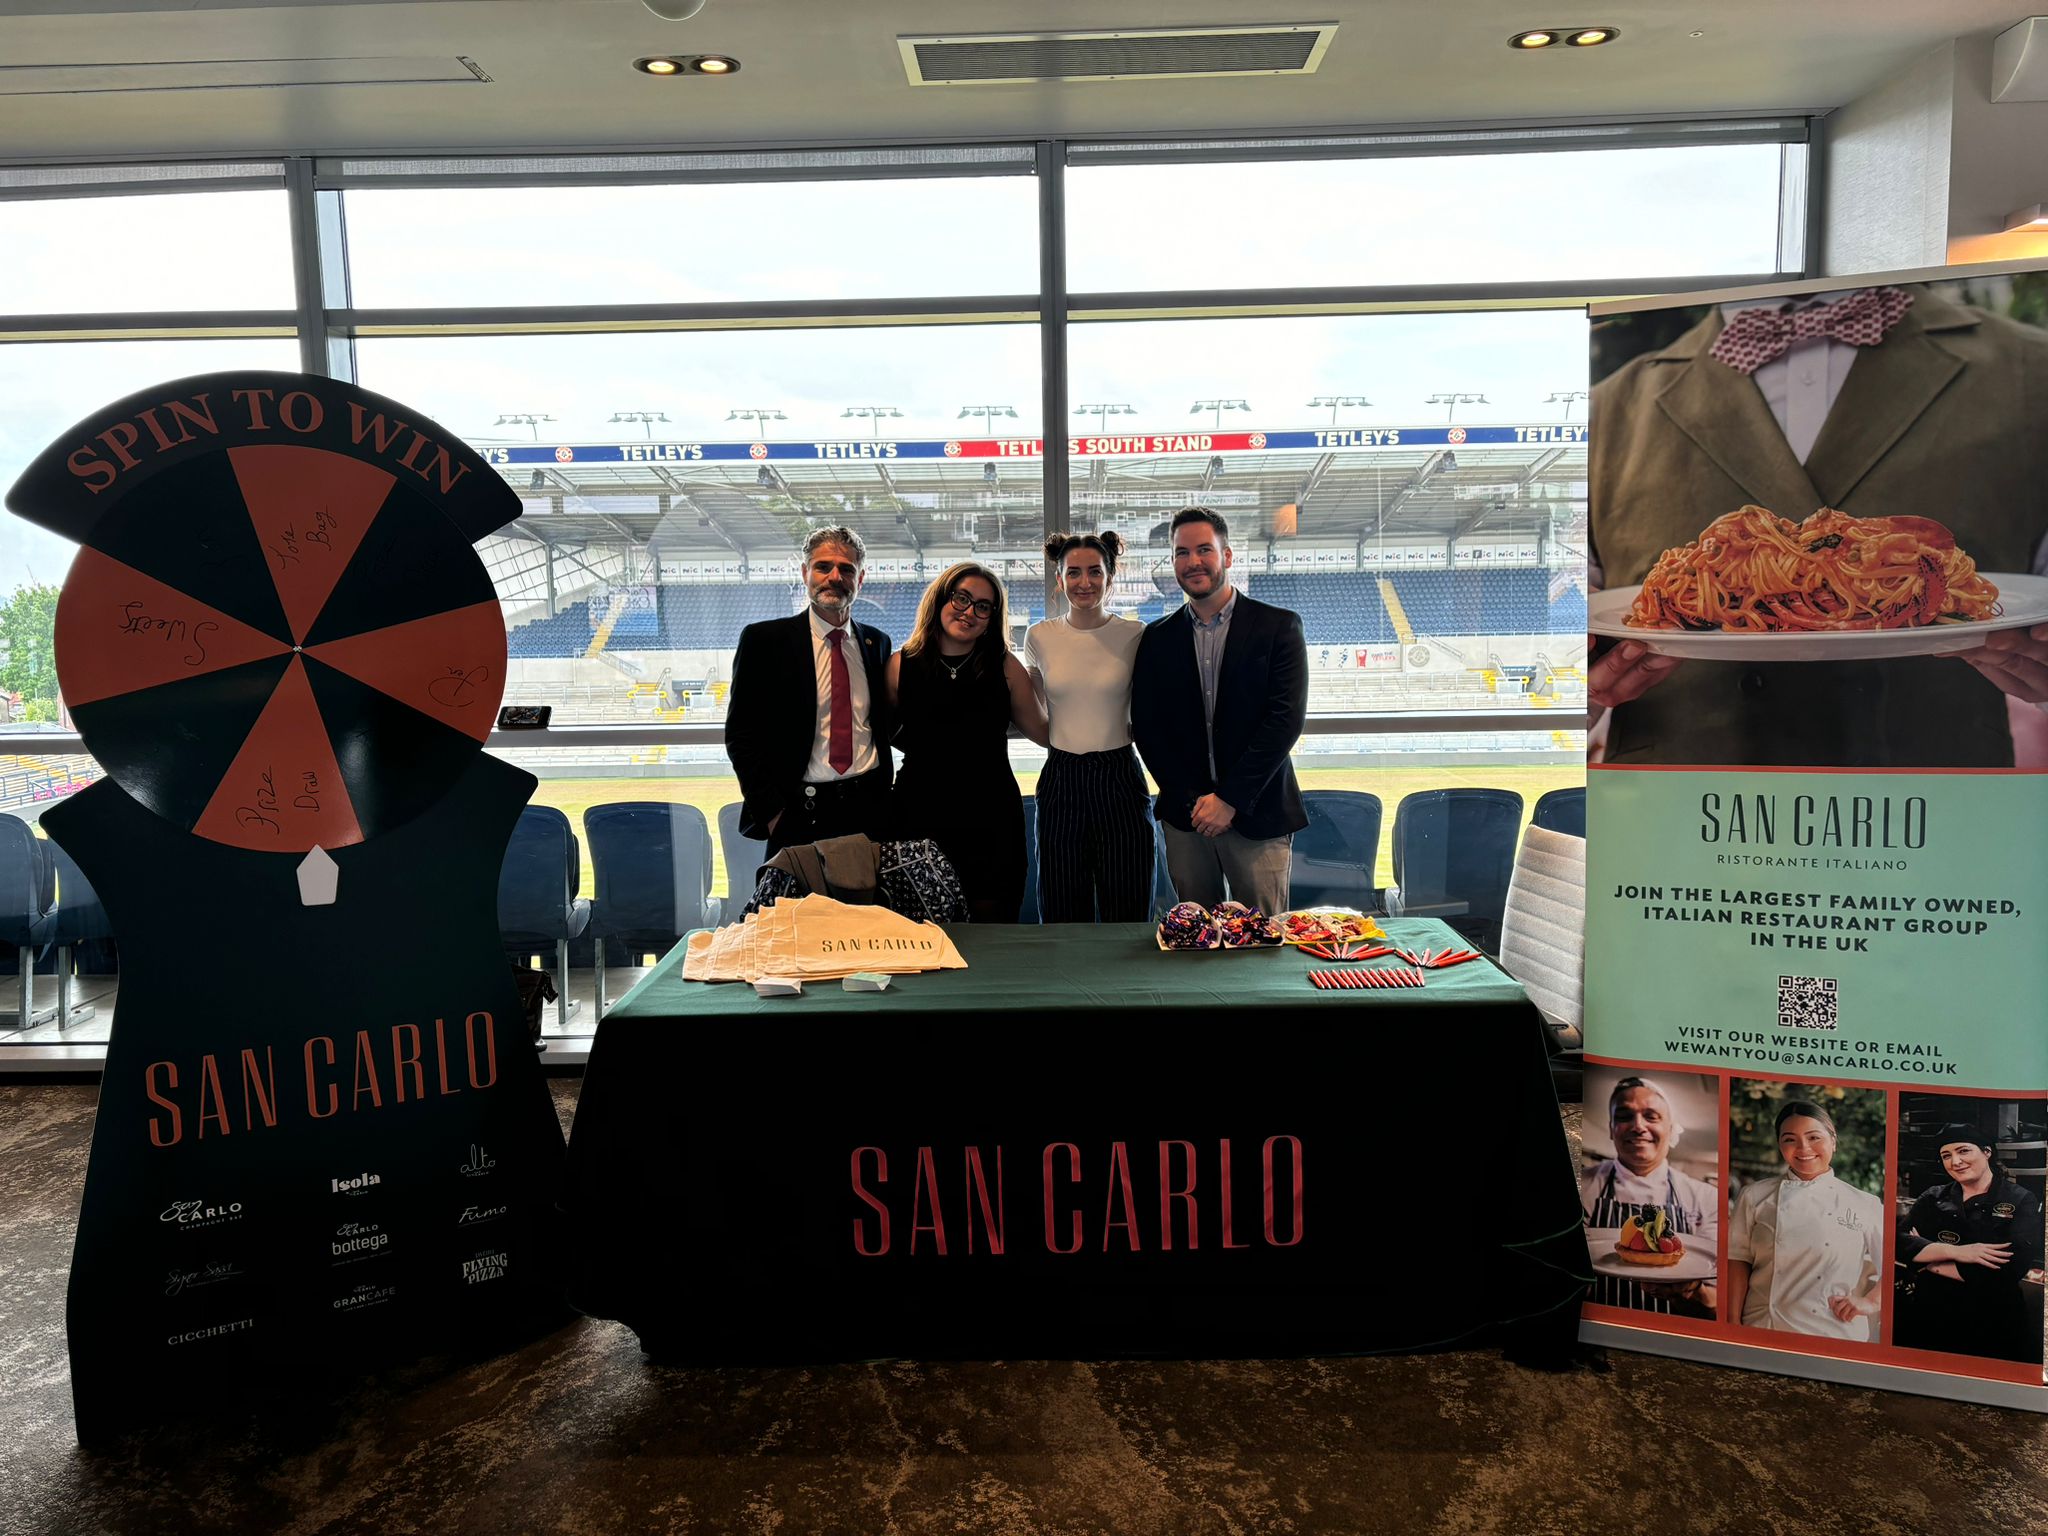 San Carlo at our event in Leeds